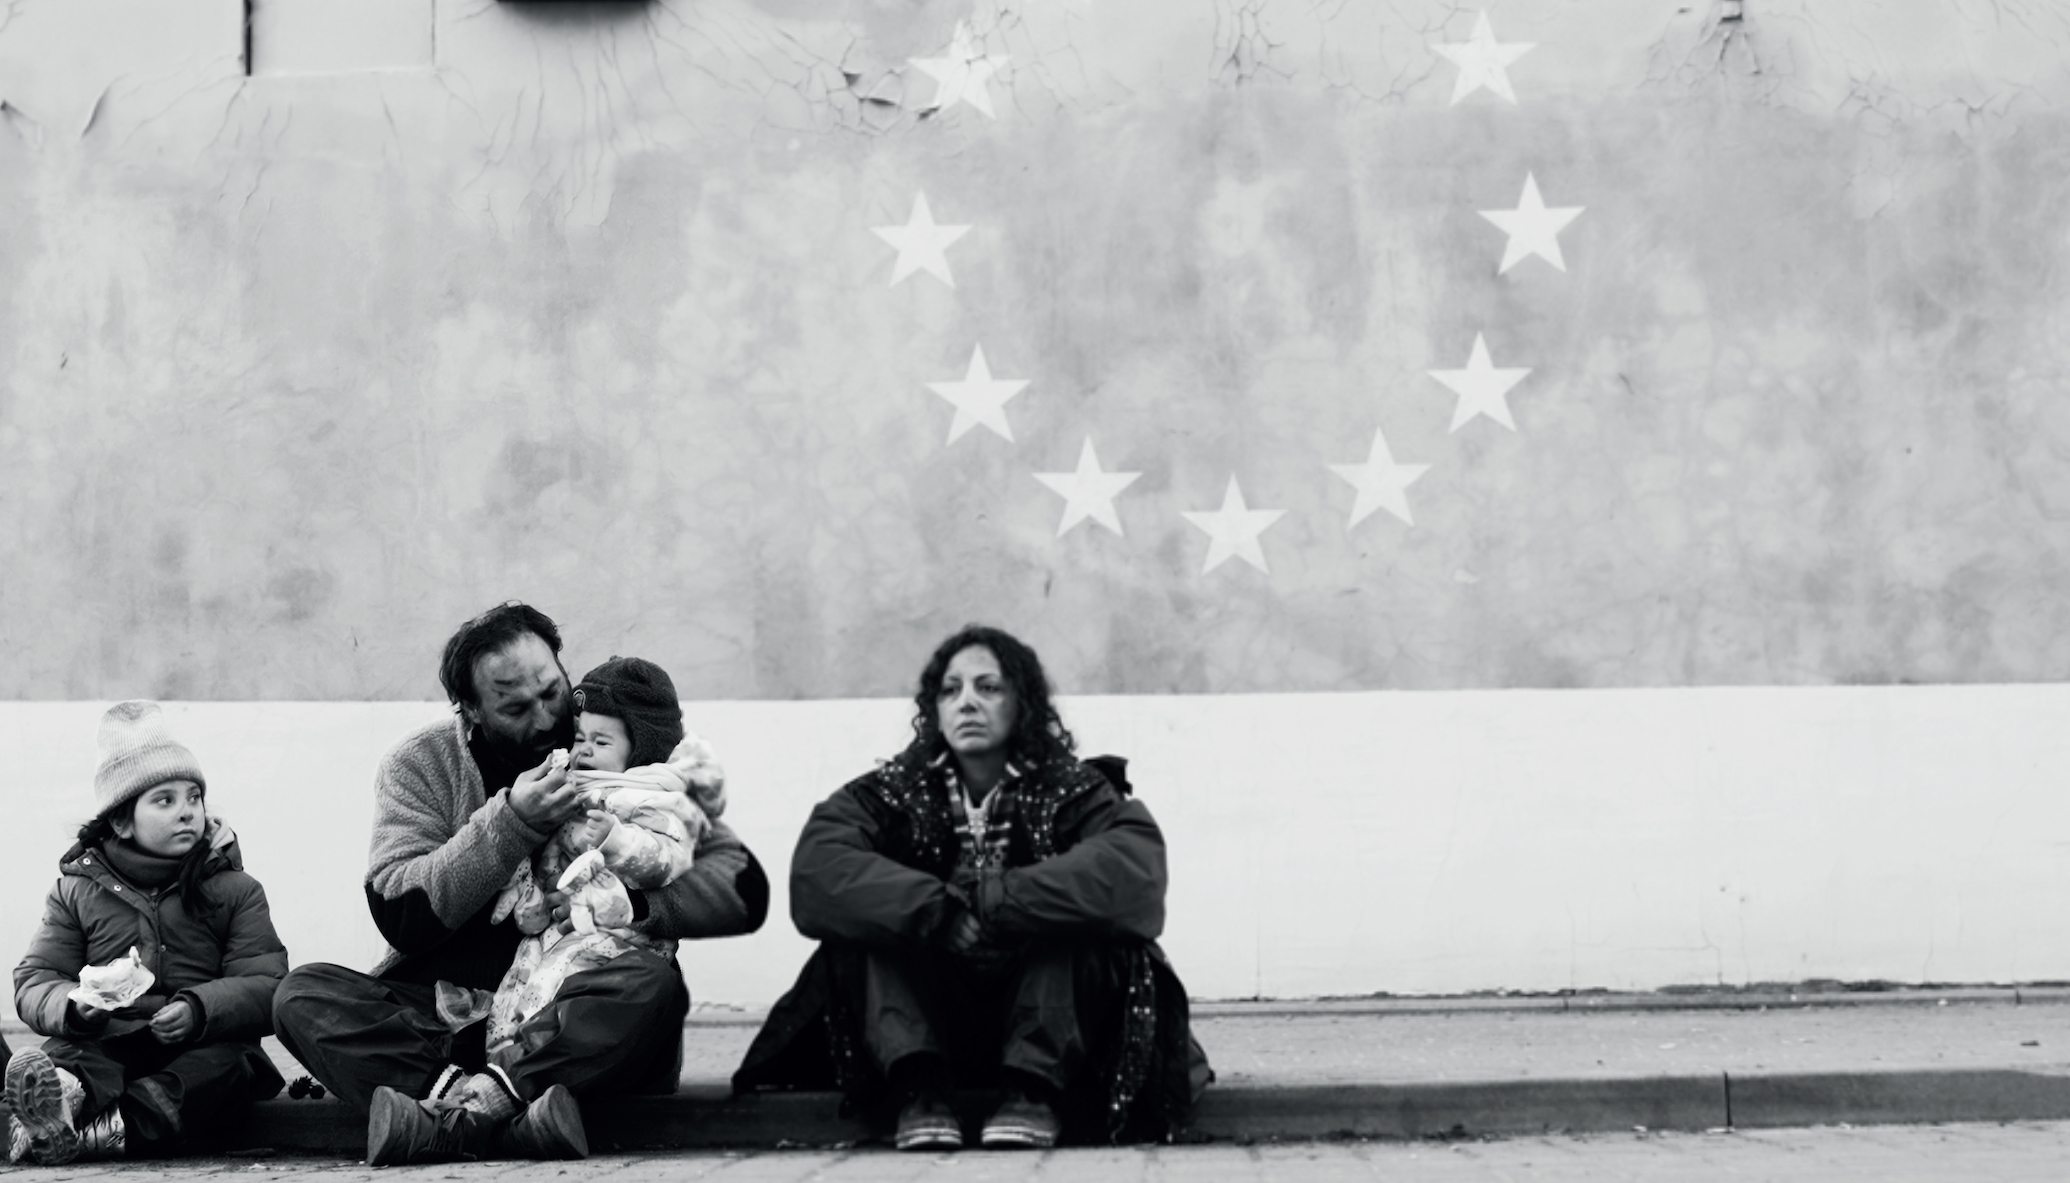 A family of four sits on the ground wearing winter coats in front of a wall with a circle of stars on it.